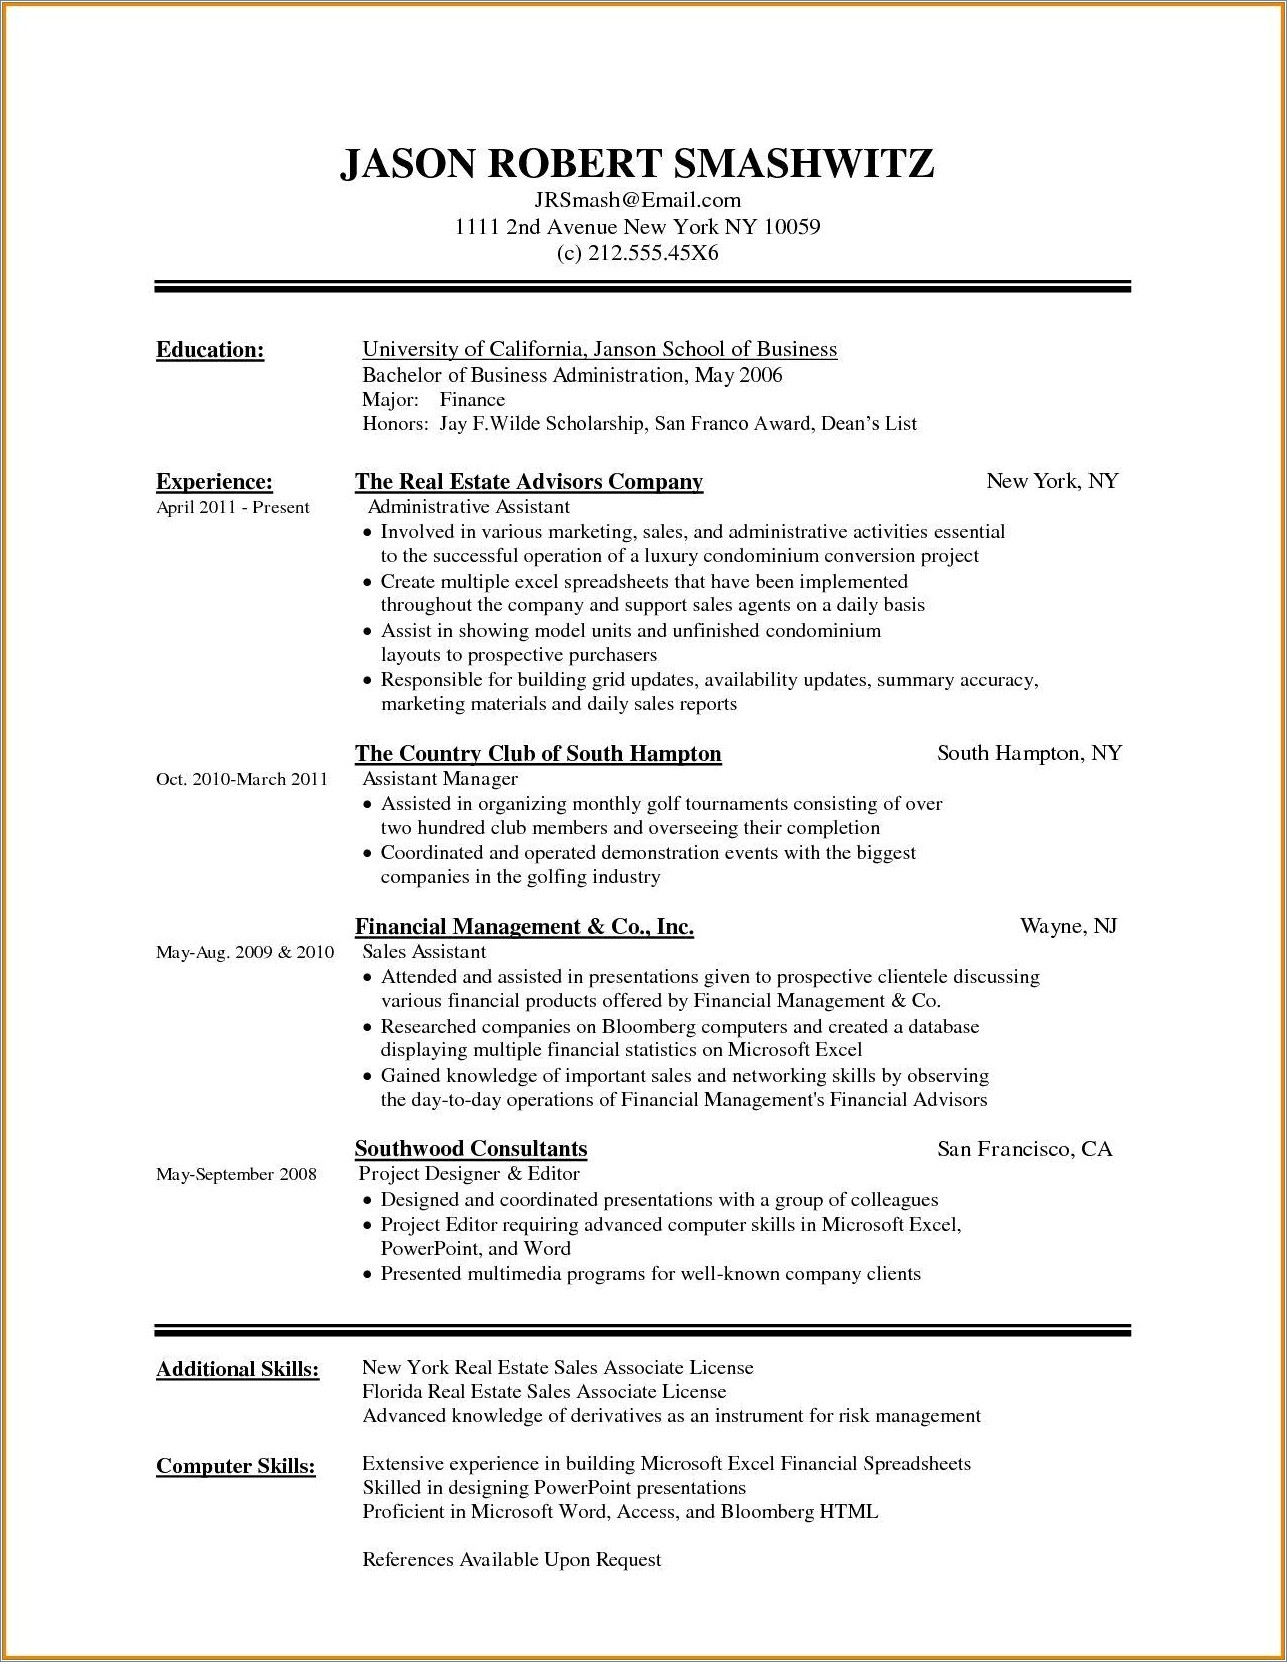 Additional Skills For Resume Ms Office